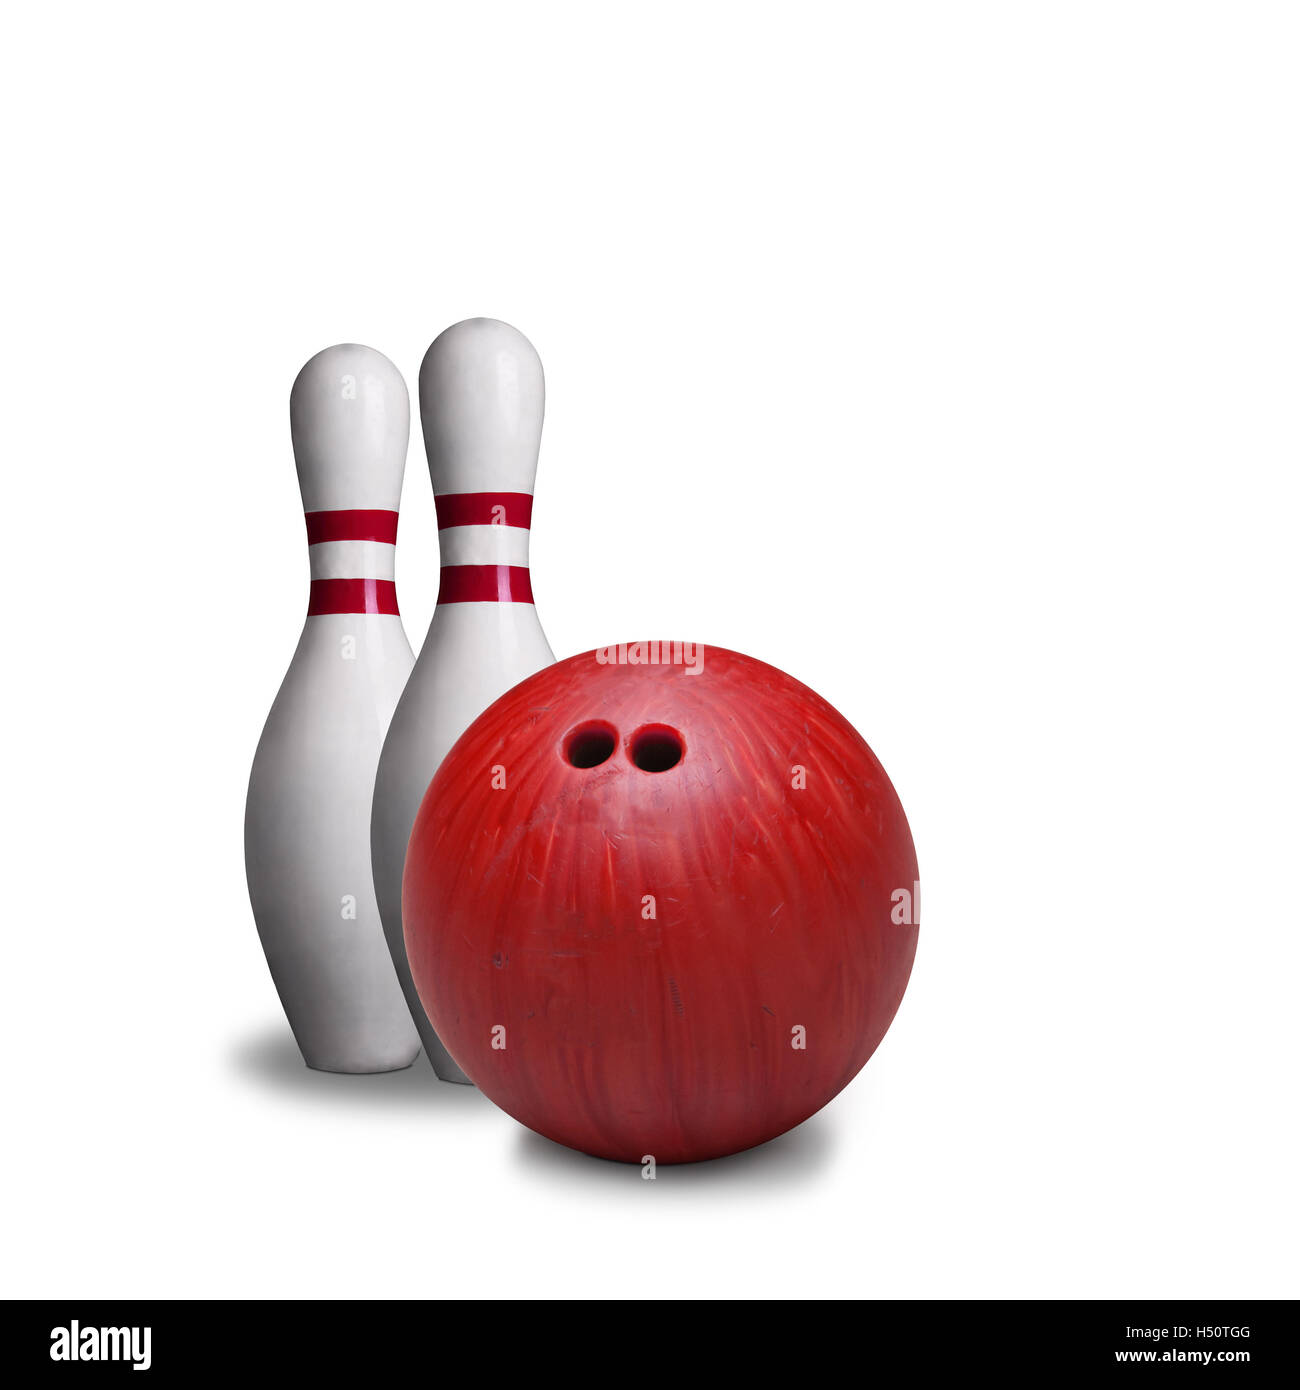 Red bowling ball and pins isolated on white background. Stock Photo